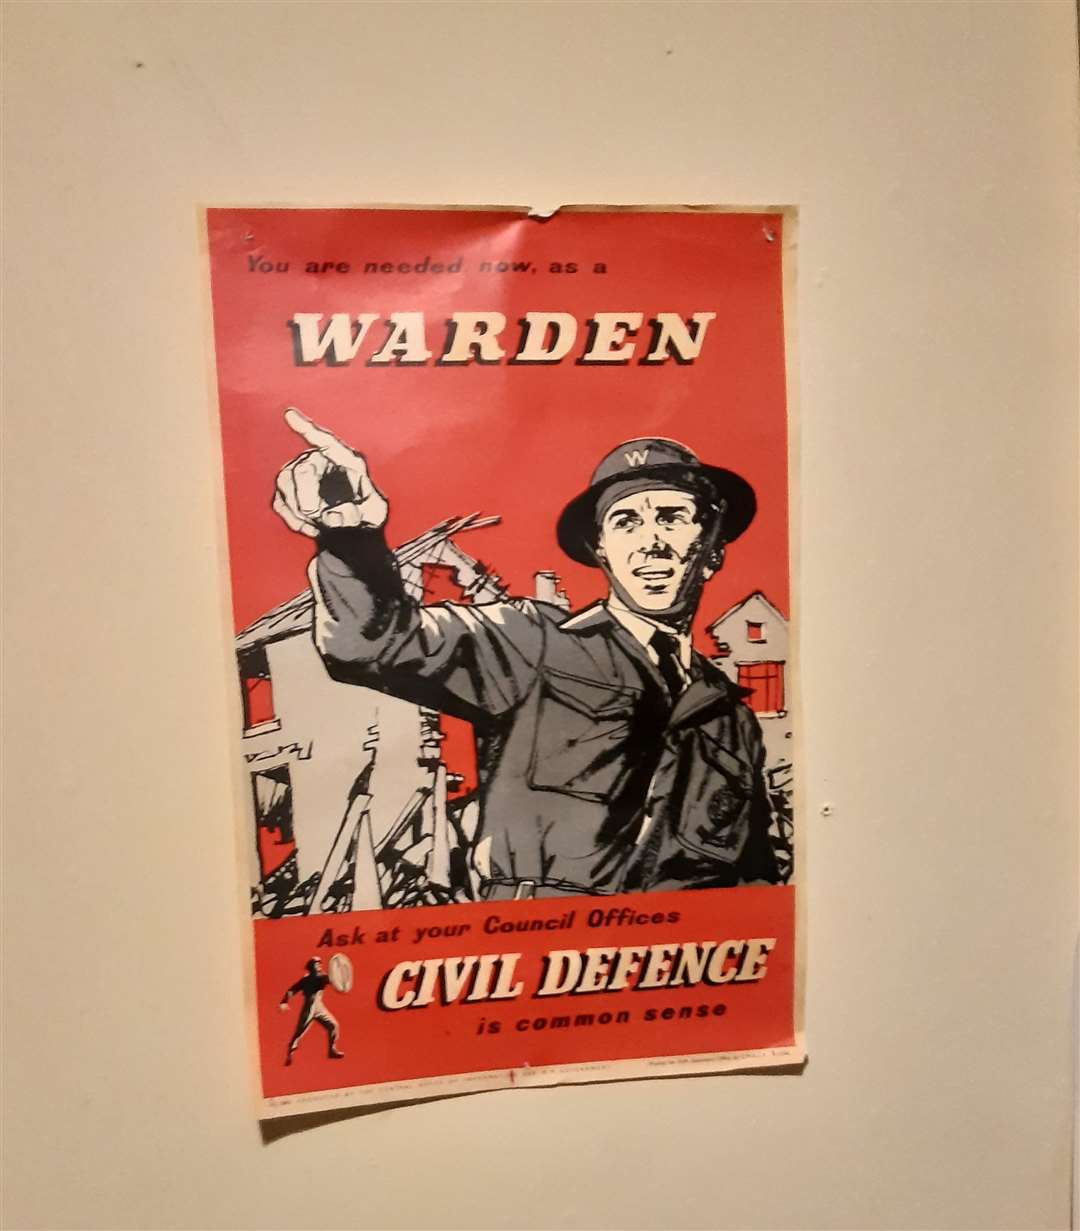 Posters recruiting for civil defence volunteer posts. Photo: Sean Delaney